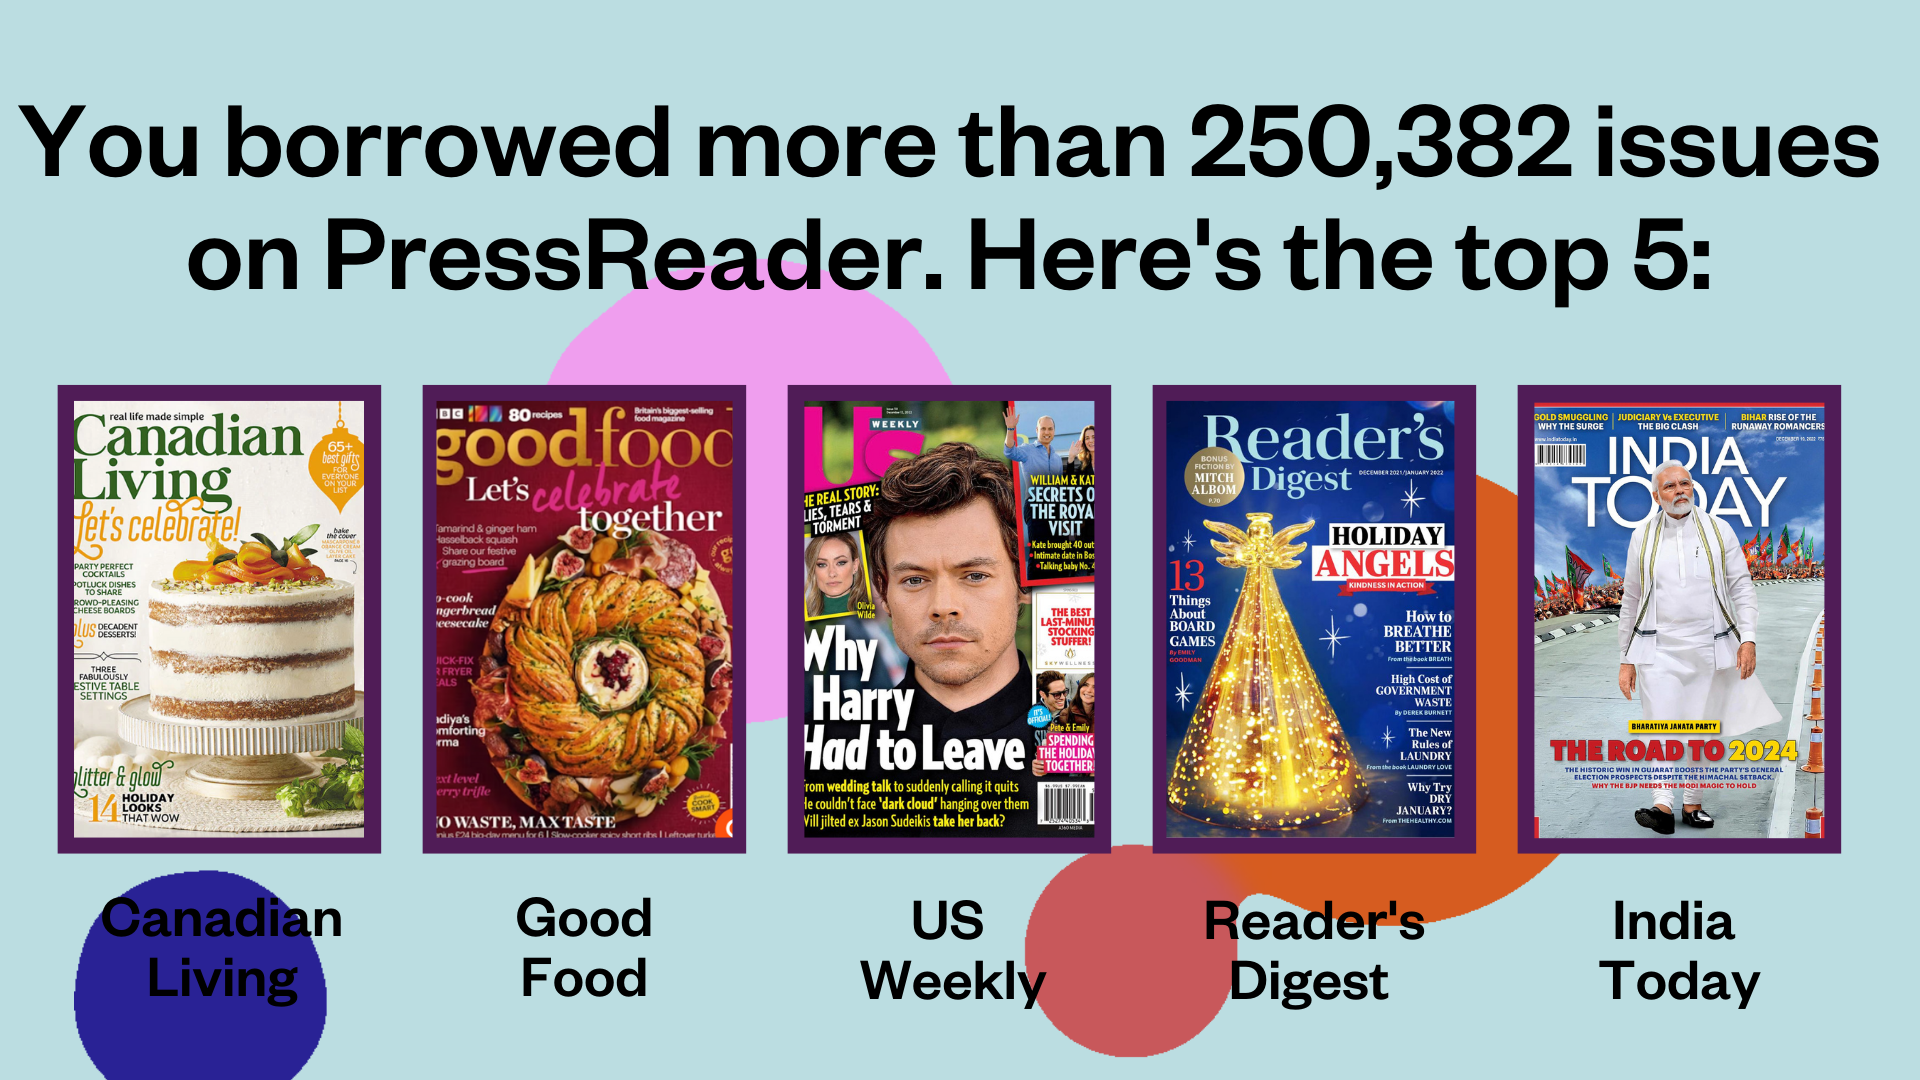 You borrowed more than 250,382 issues on PressReader. Here's the top 5: